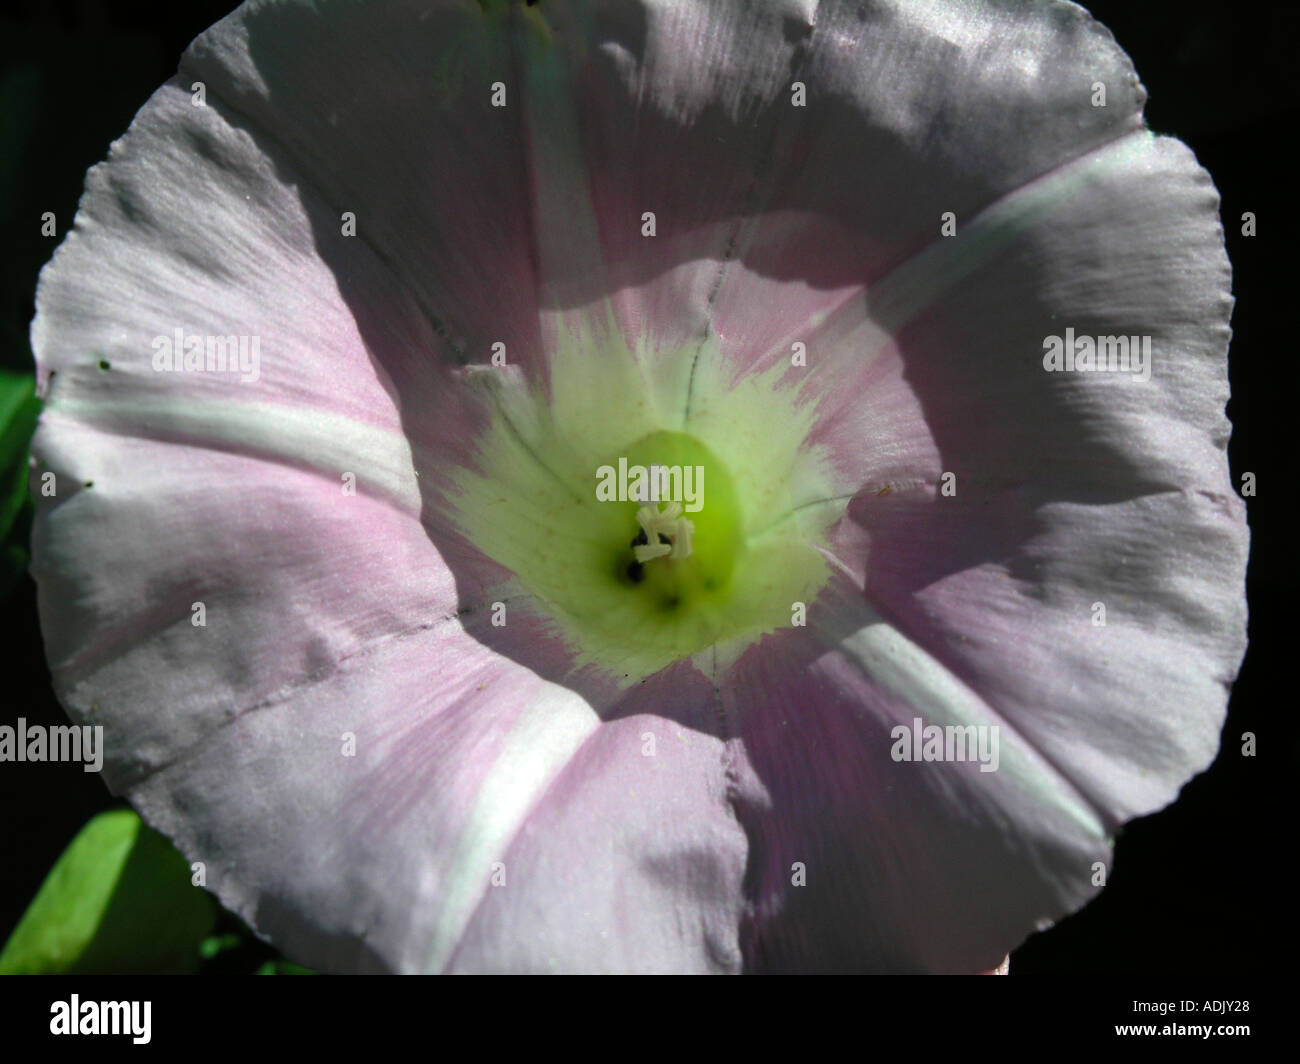 Morning Glory Convolvulus sepium L seeds containing natures own LSD like drug Stock Photo